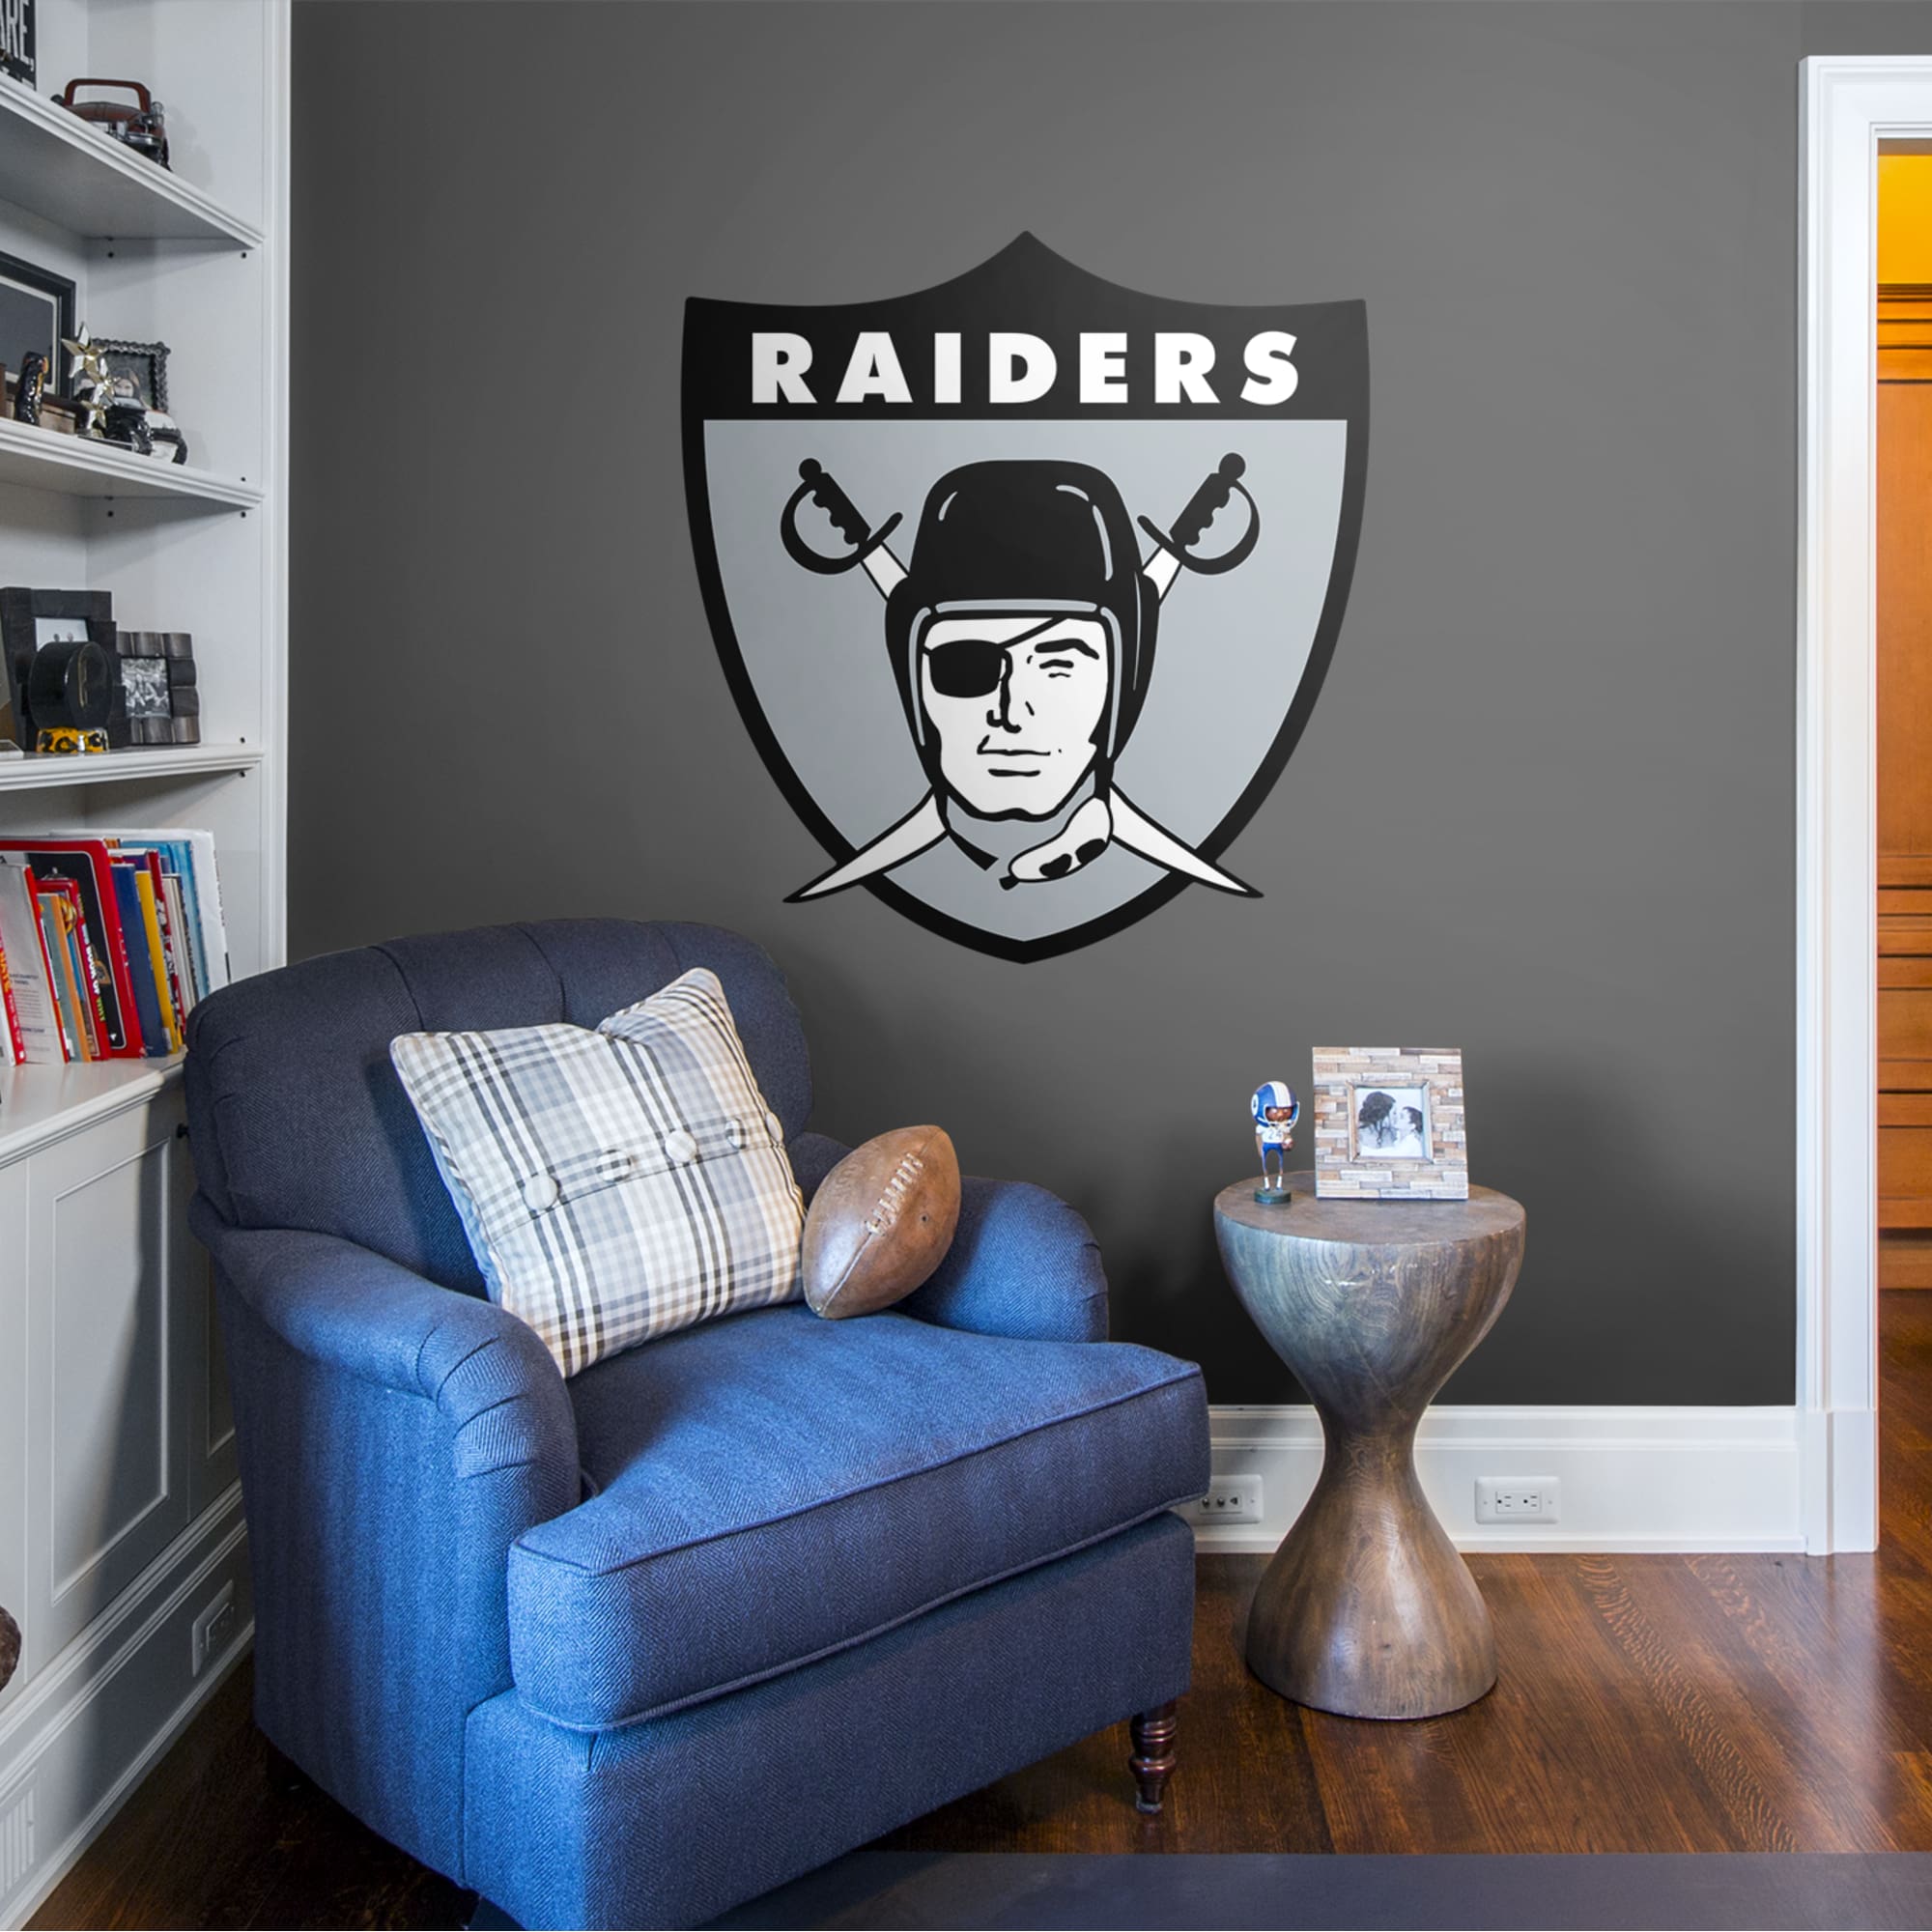 Las Vegas Raiders: Original AFL Logo - Officially Licensed NFL Removable Wall Decal 43.0"W x 39.0"H by Fathead | Vinyl